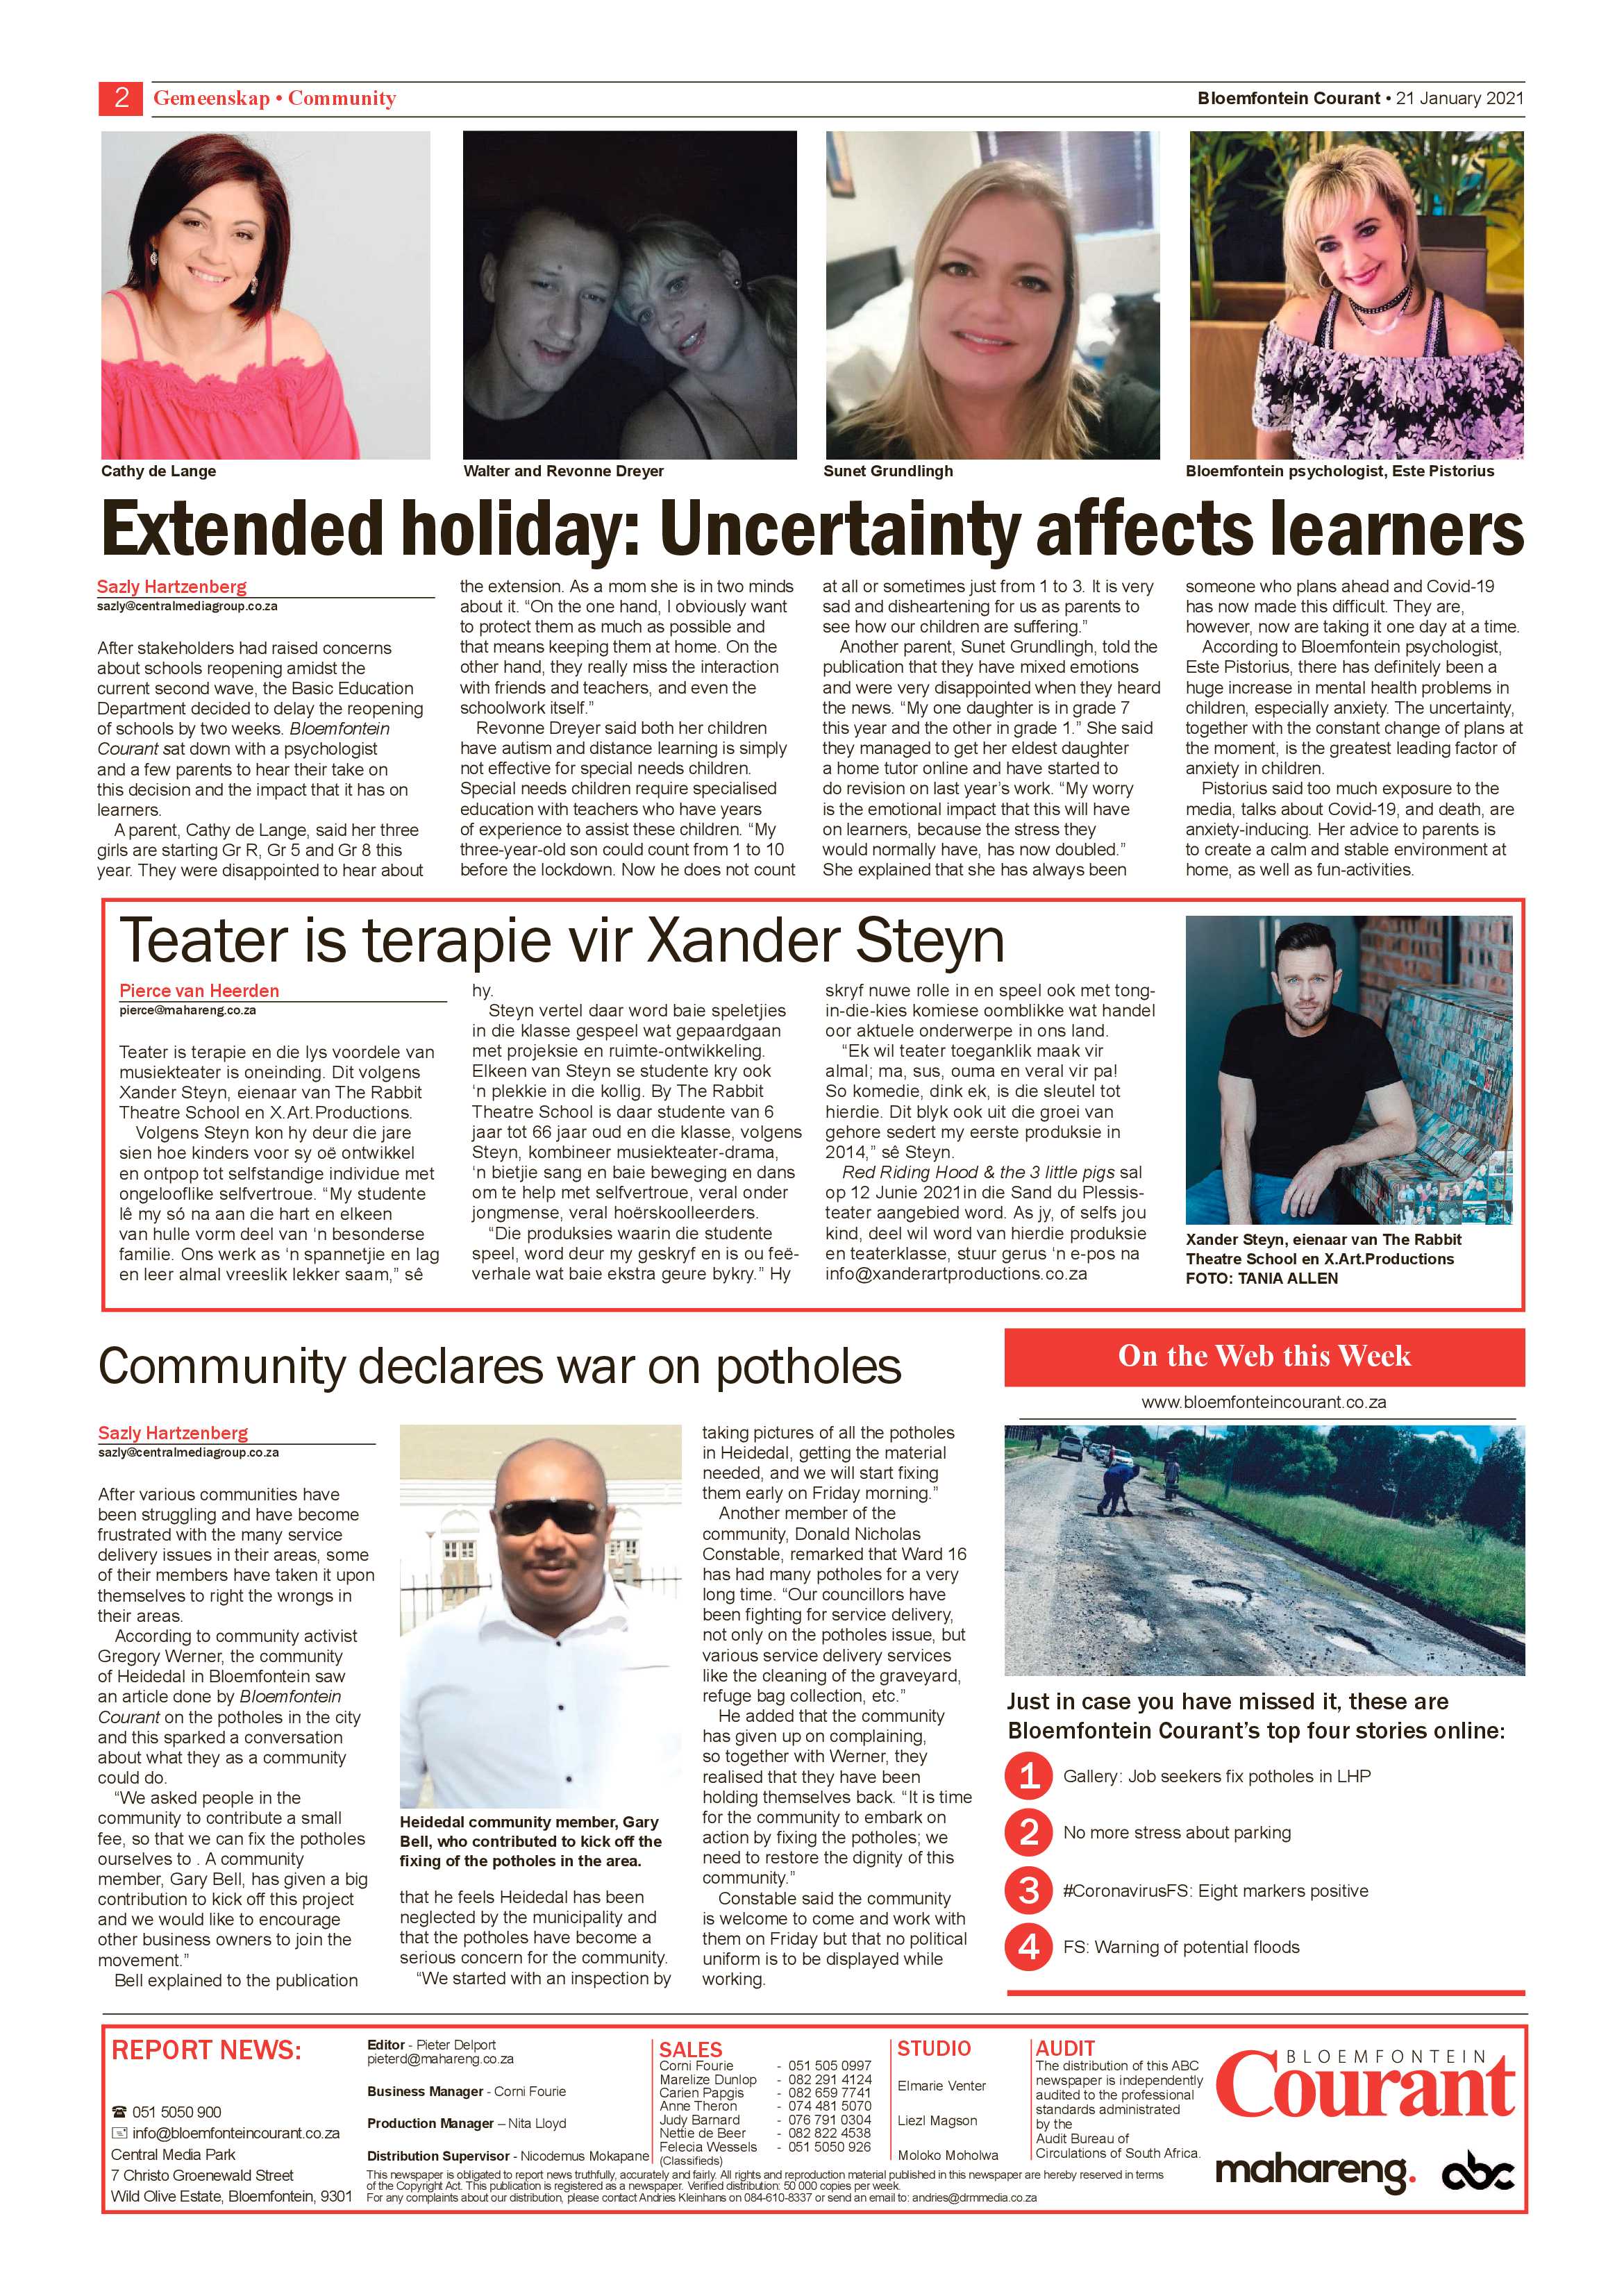 https-bloemfonteincourant-epaper-products-caxton-co-za-wp-content-ftp-epaper_uploads-86-bloemfontein_courant_21_january_2021-bloemfontein_courant_21_january_2021-5-pdfpg12-epapers-page-2